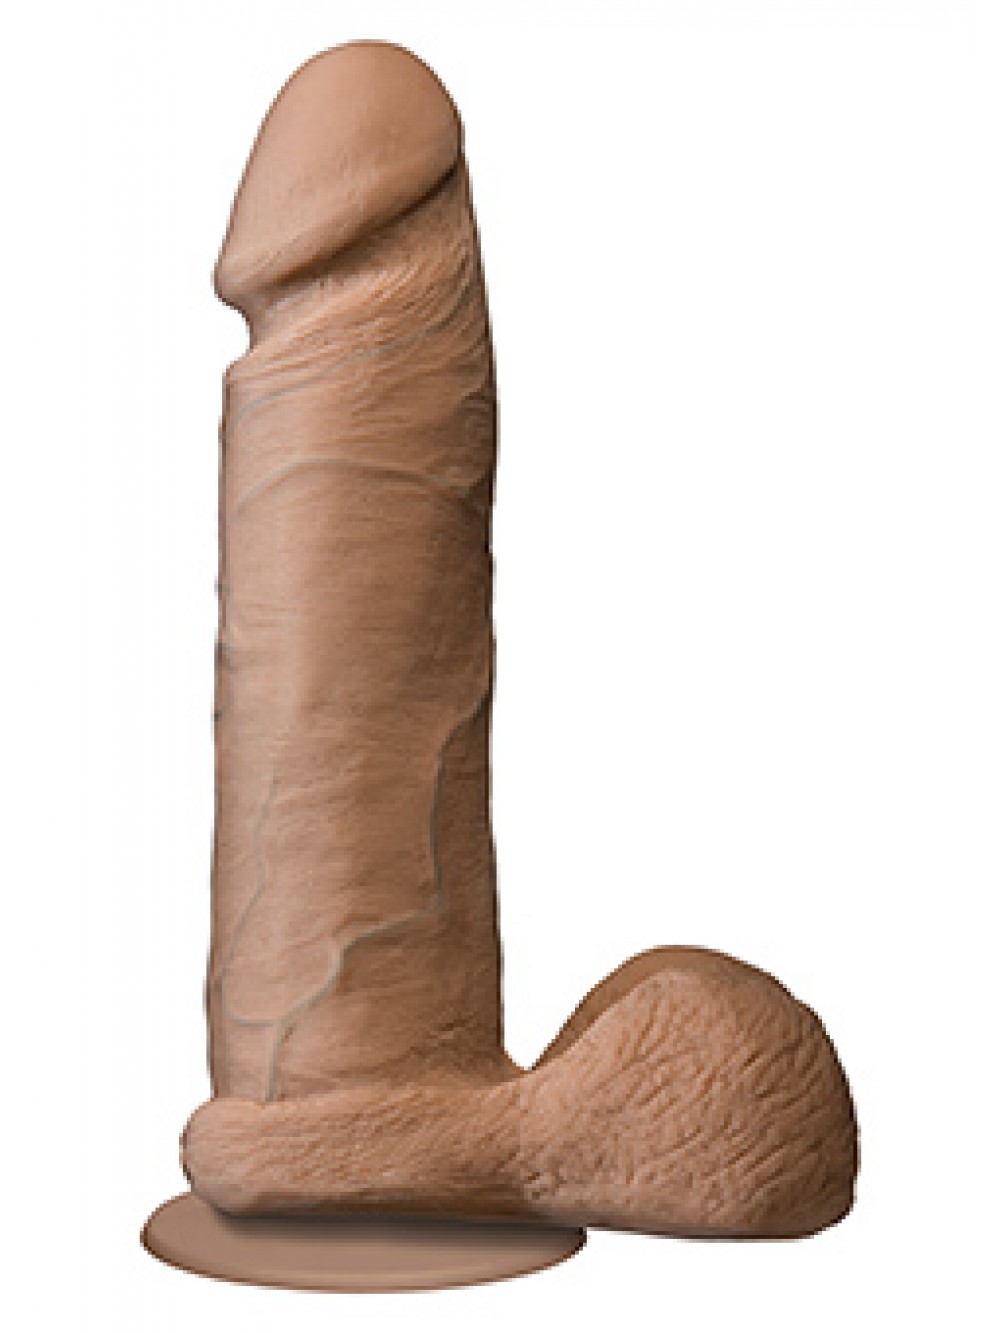 THE REALISTIC COCK UR3 8 INCH BROWN 0782421014322